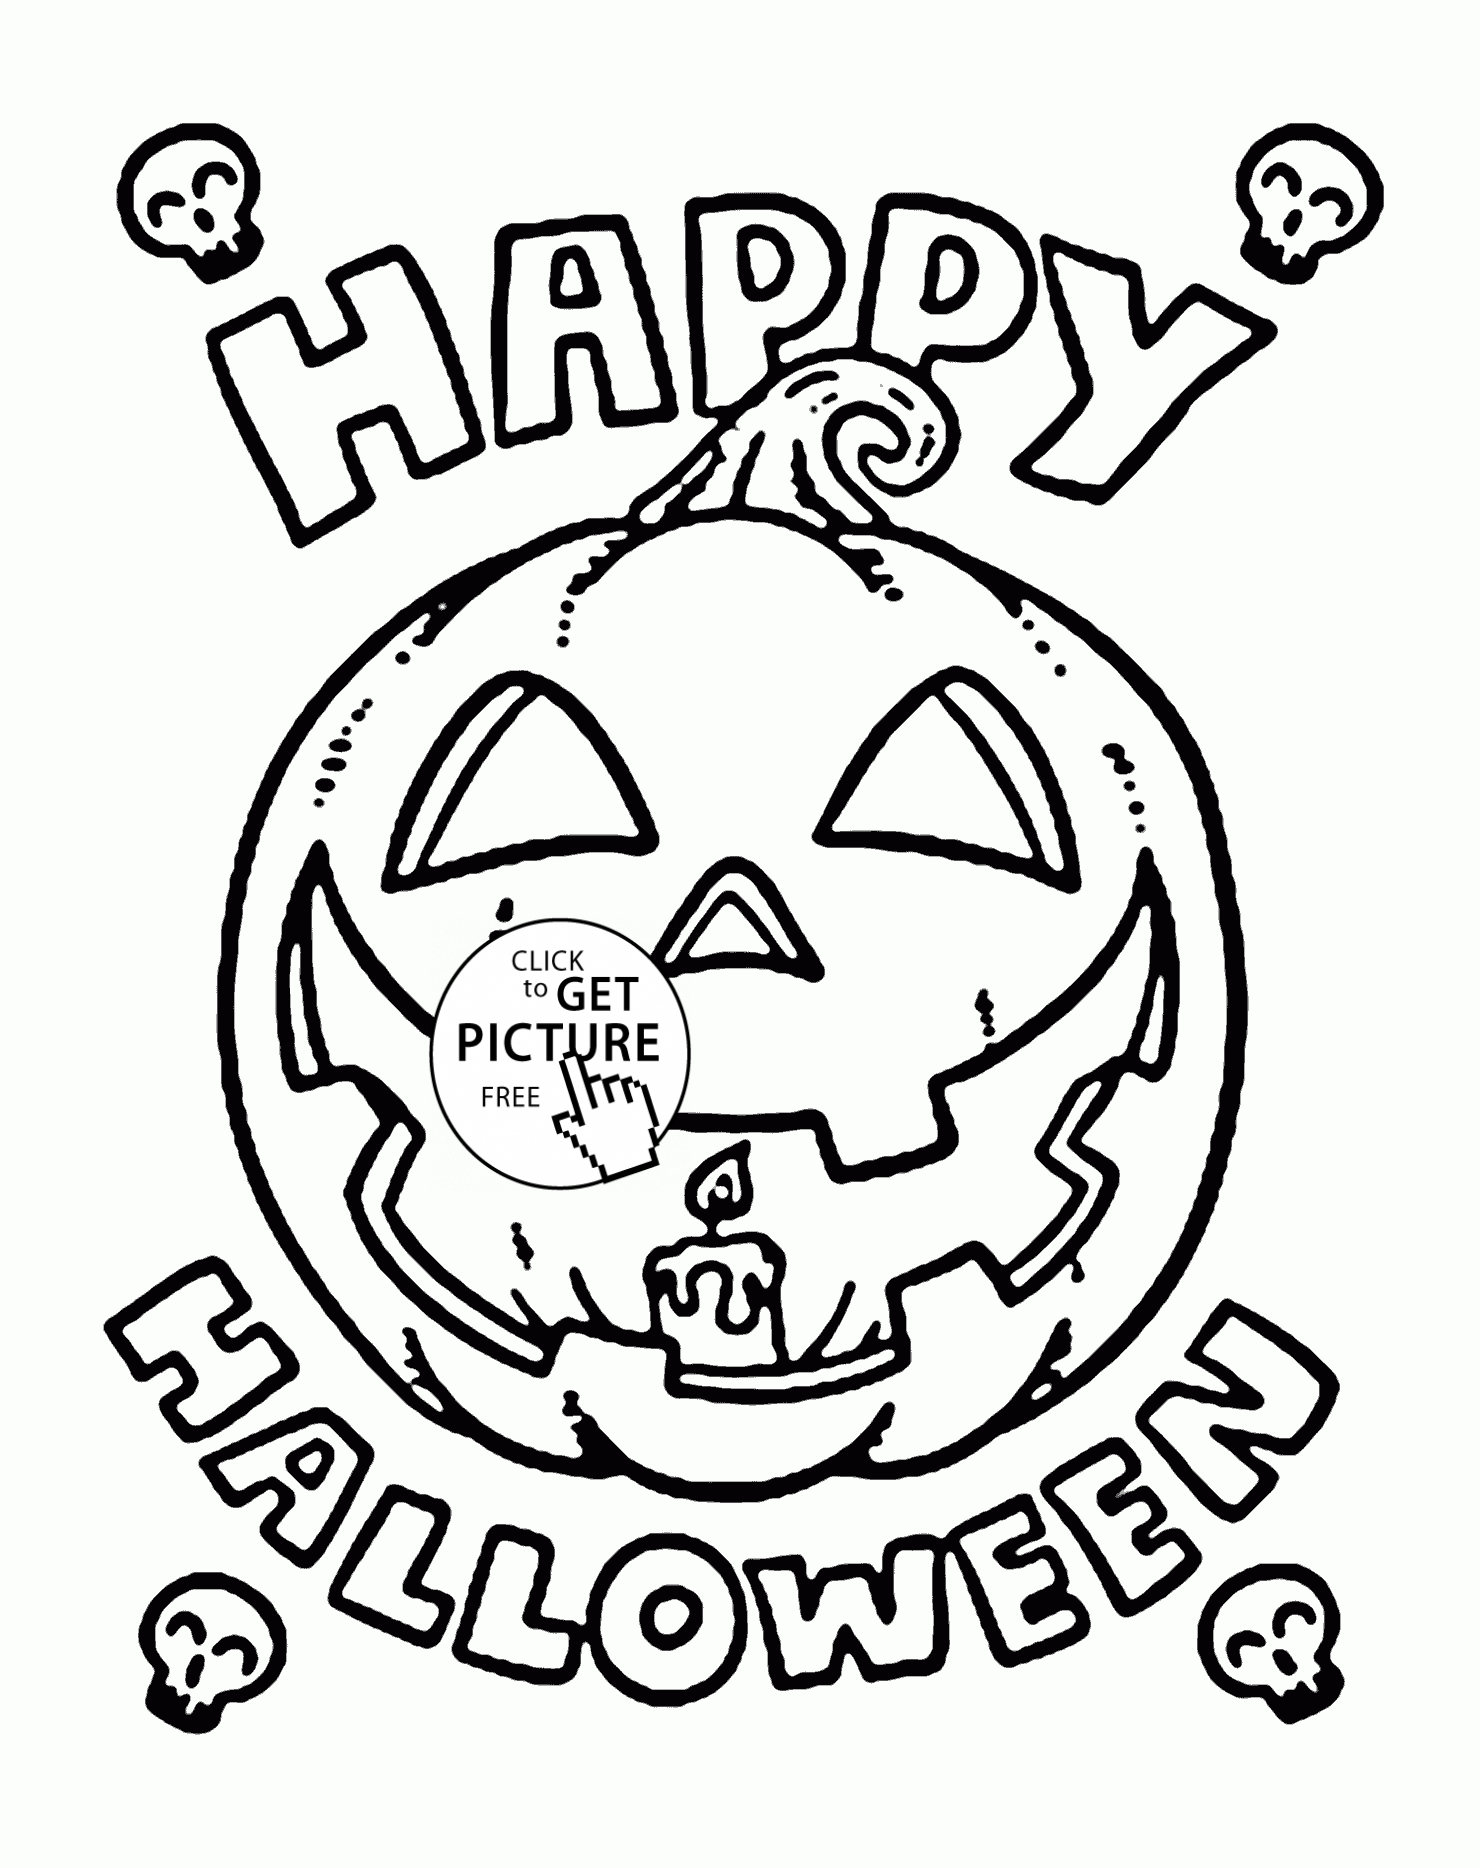 Cute Halloween Coloring Pages Printable Happy Halloween Pumpkin Coloring Pages For Kids Halloween